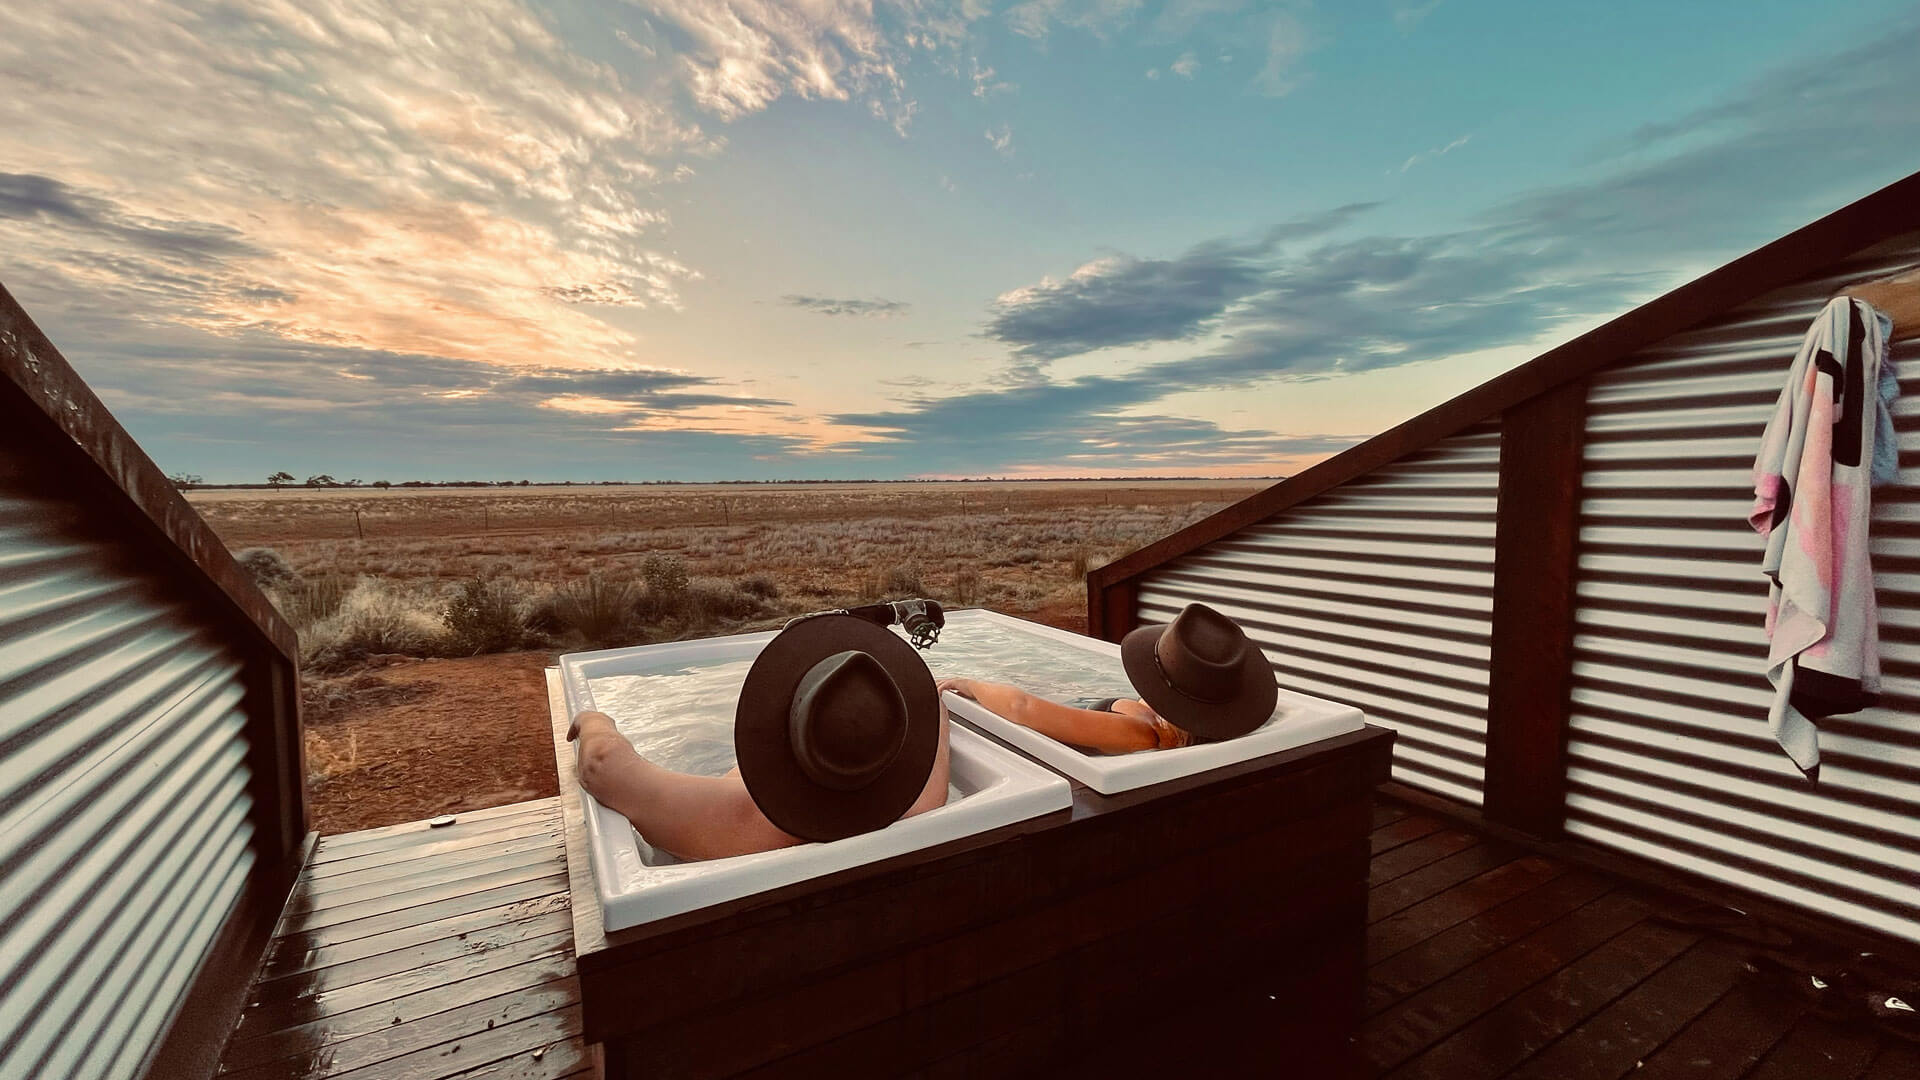 Queensland Outback Odyssey